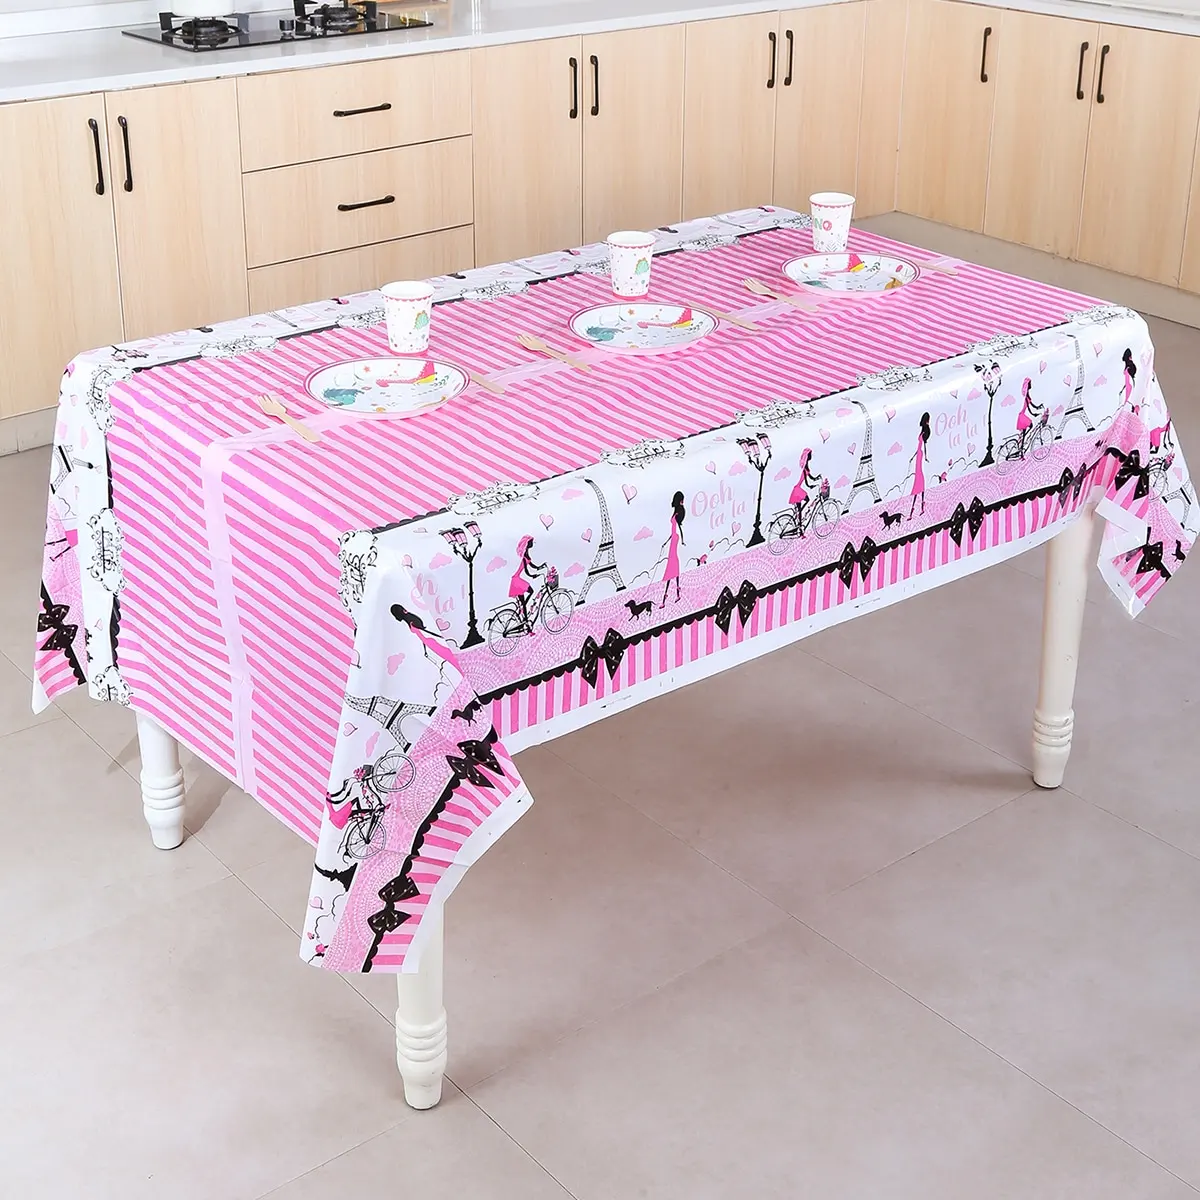 

Pink Paris Tablecloth Fashion Plastic Tablecovers Girl Woman Birthday Party Decorations Bachelor Party Disposable Tablecloth